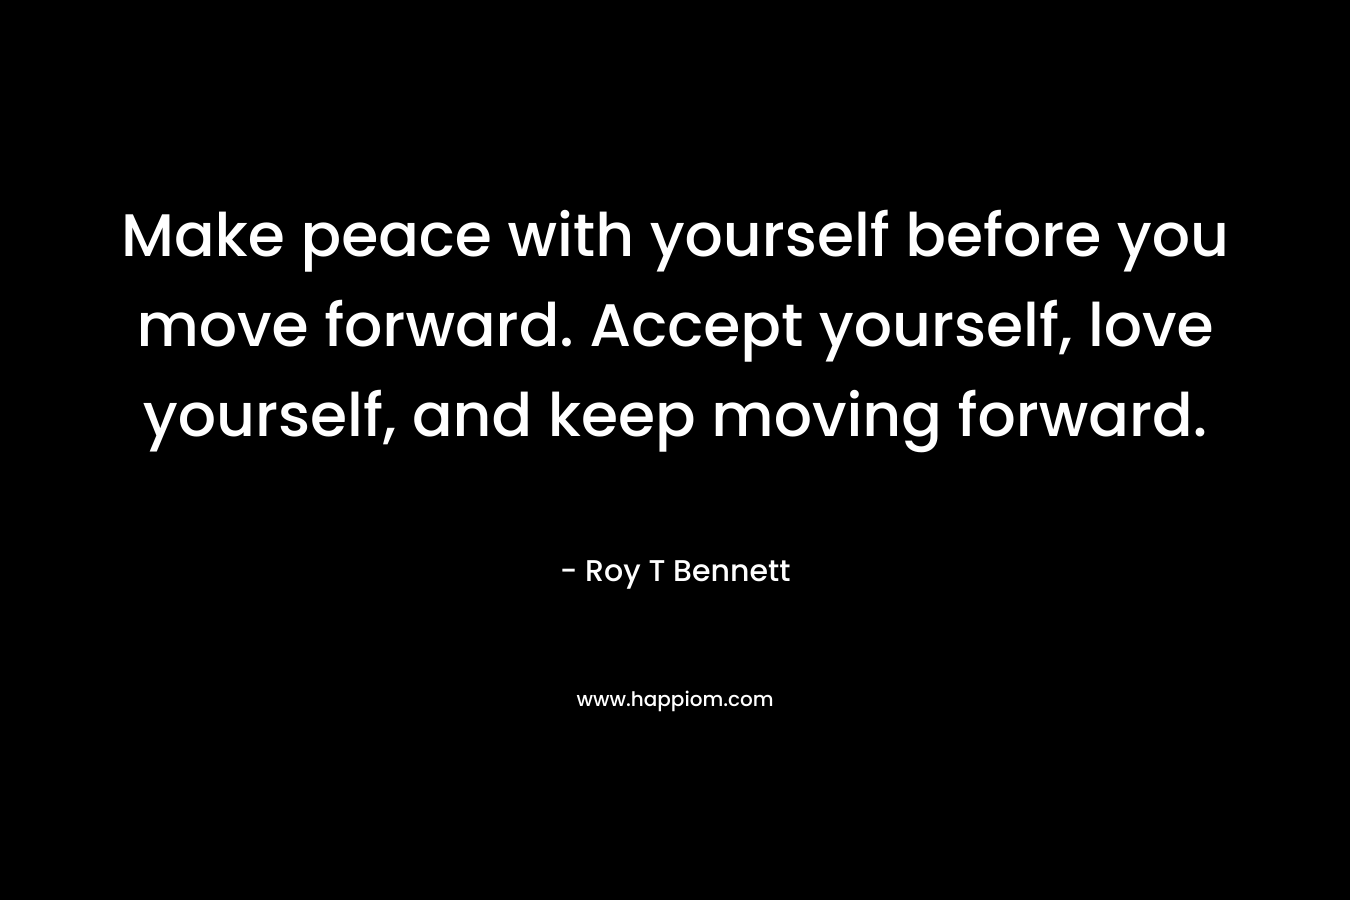 Make peace with yourself before you move forward. Accept yourself, love yourself, and keep moving forward. – Roy T Bennett